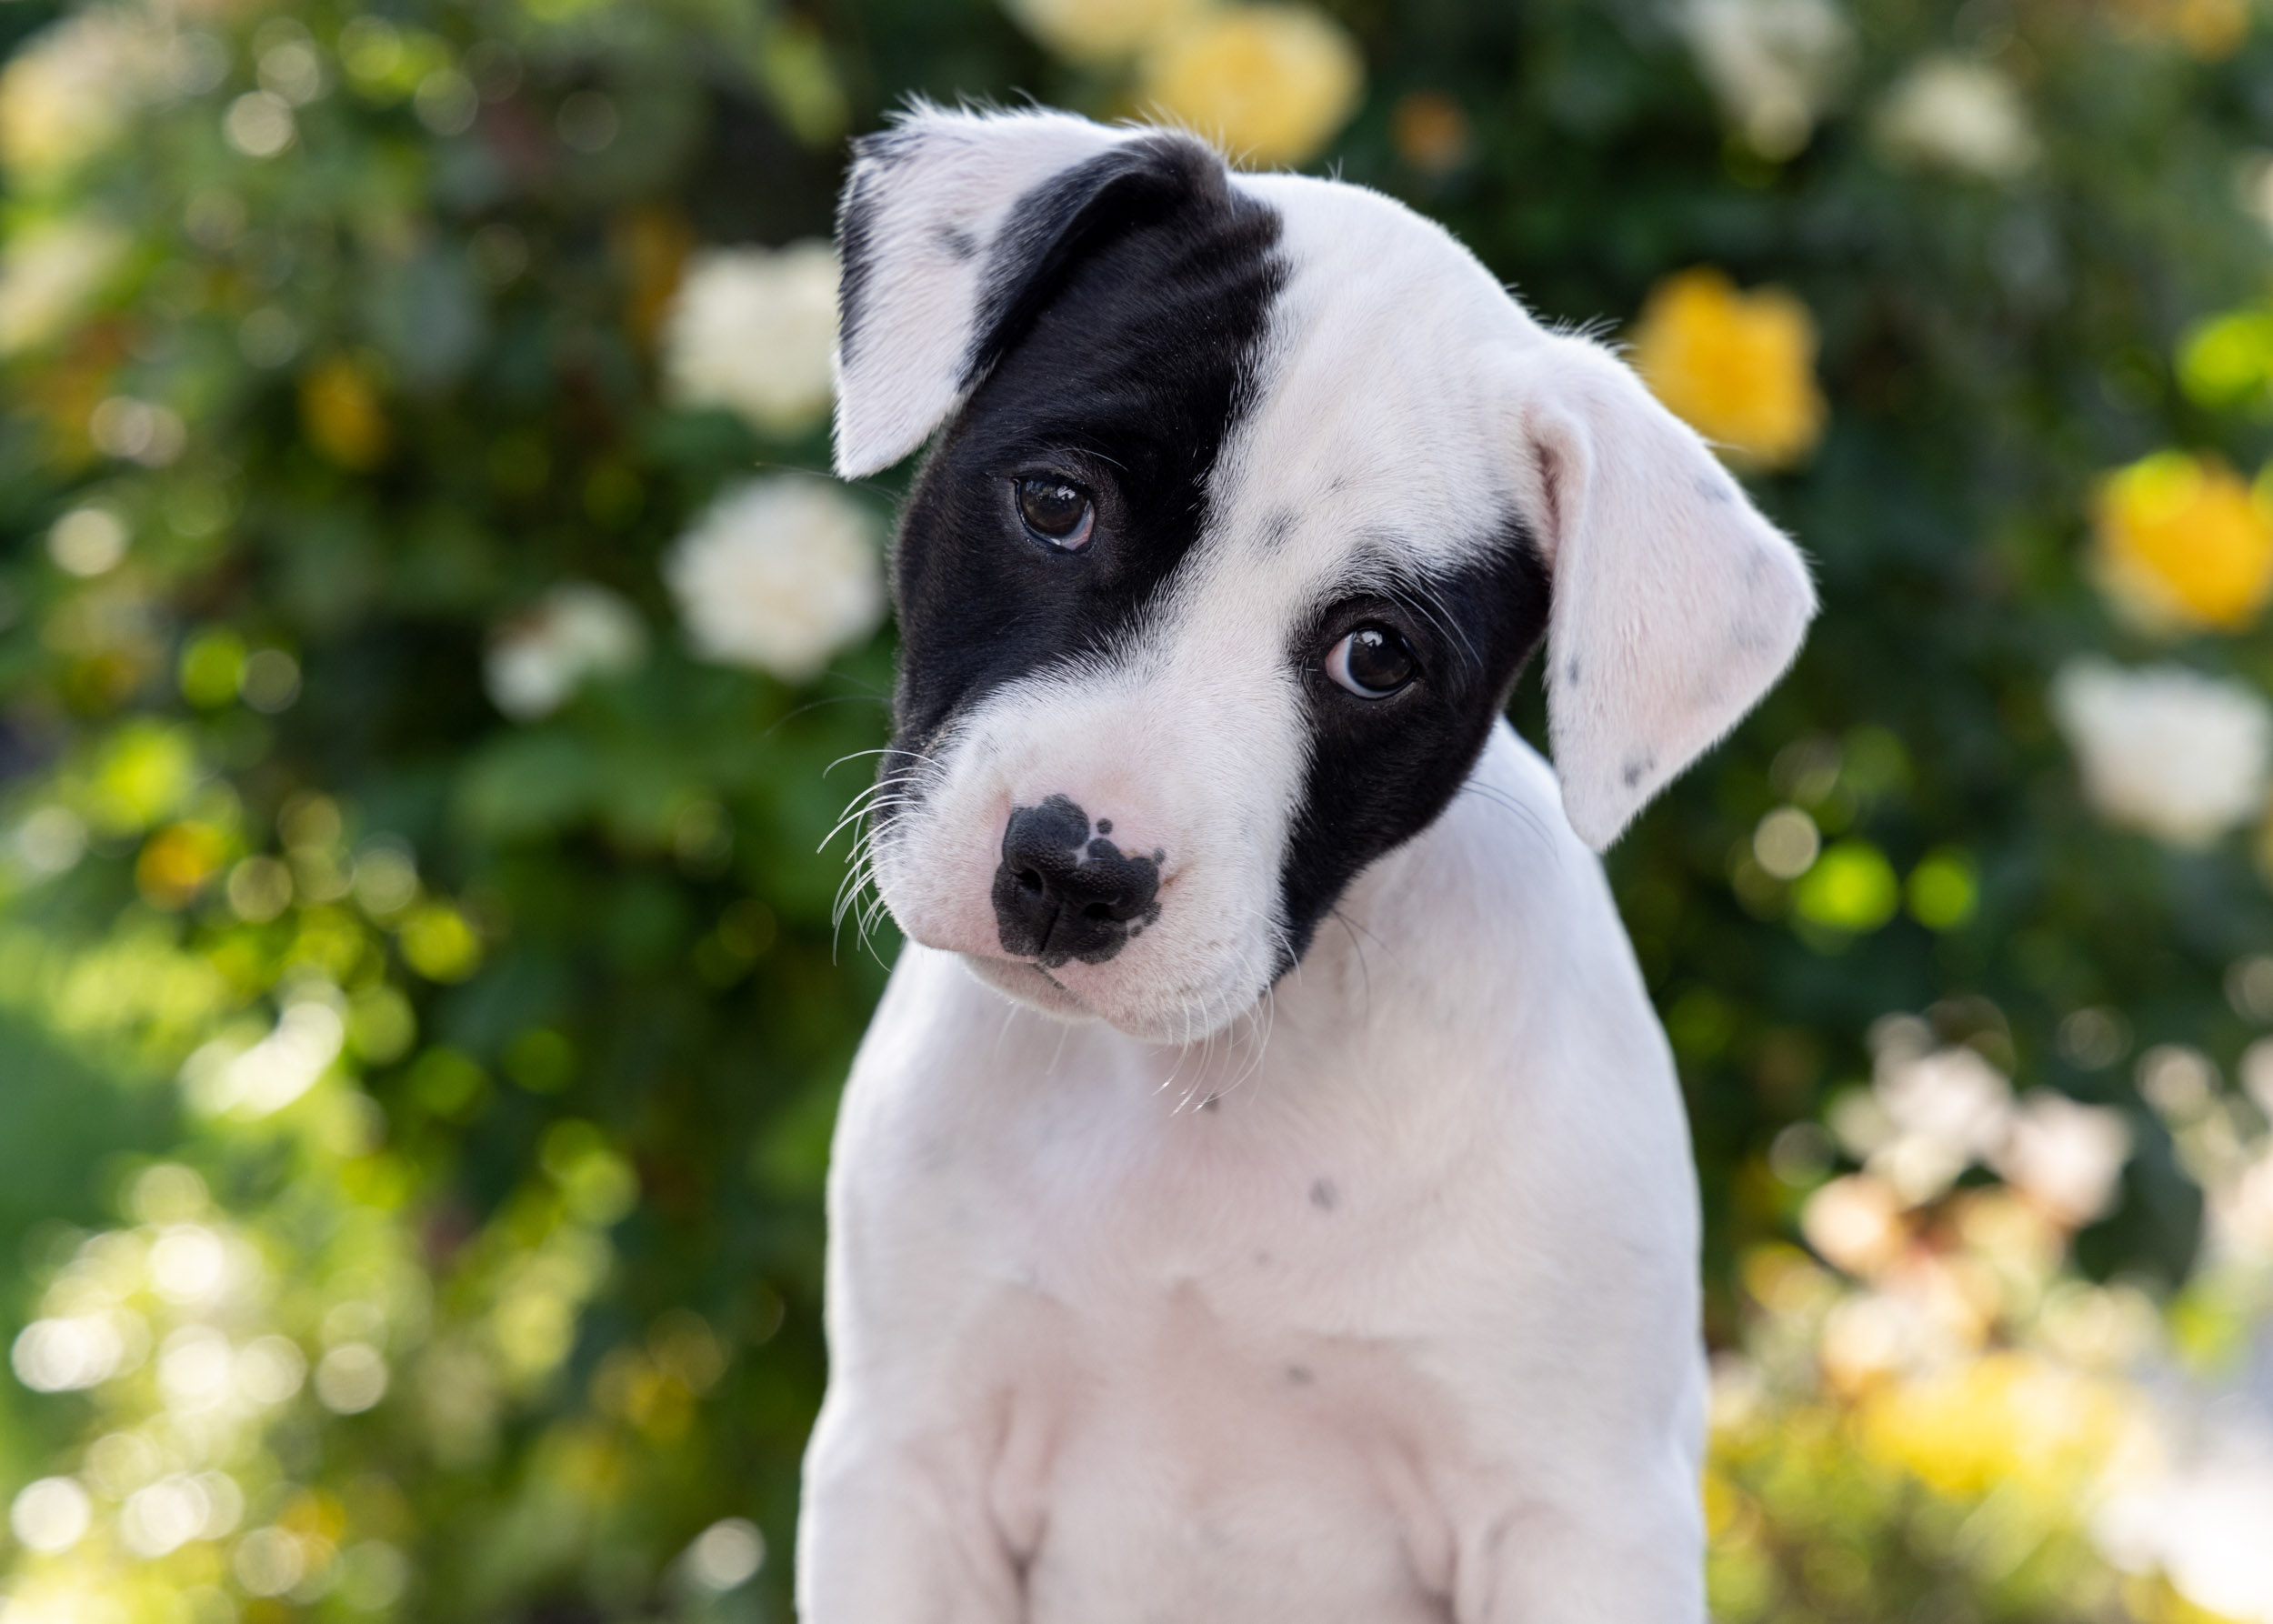 Dog Photography | Puppy Against Flowers by Mark Rogers